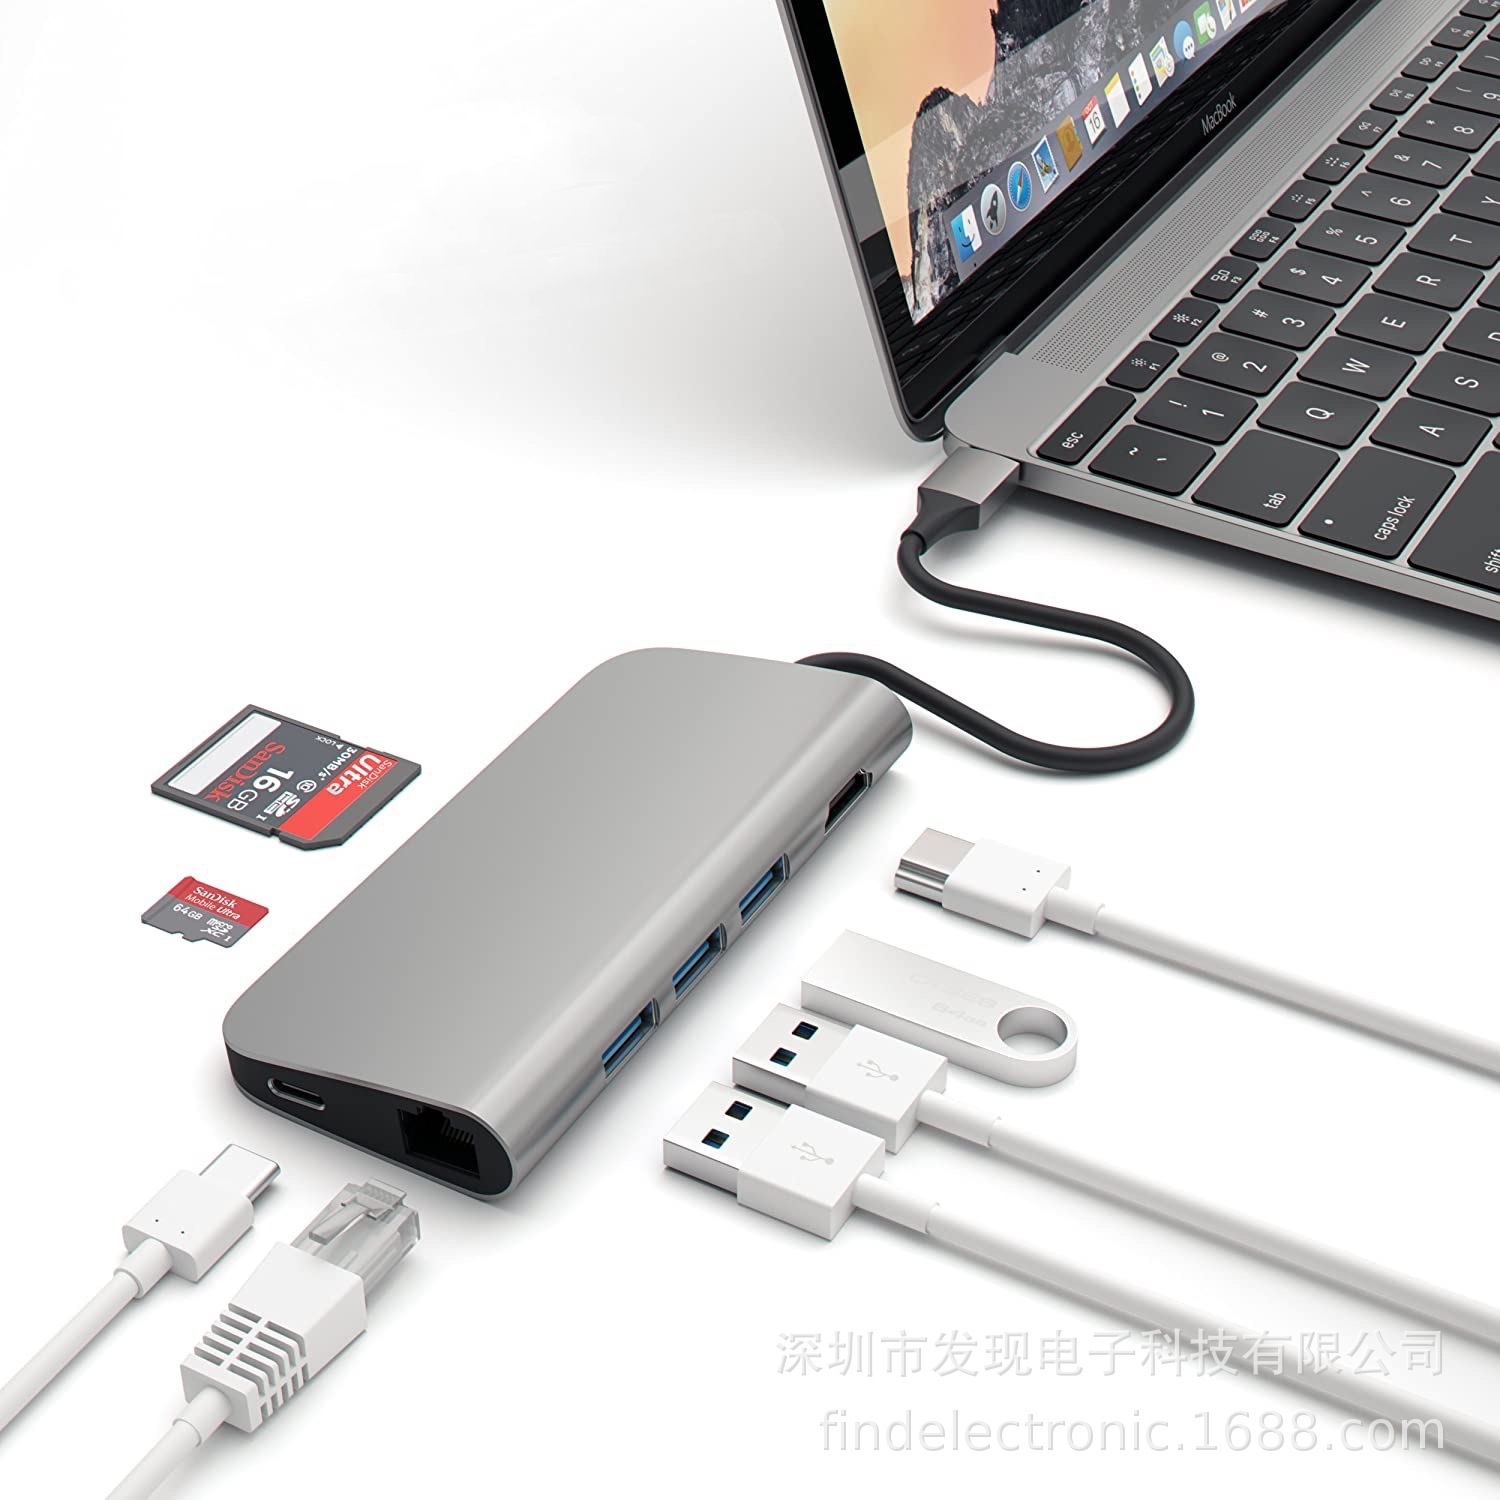 USB C USB3.1 TYPE C HUB 8 ใน 1 USB HUB All in One USB C to HDMI Card Reader LAN PD Charging Adapter 4K รุ่น 50538 for Huawei Mate 10/ P20/ P30, Microsoft Surface, Apple MacBook, Macbook Pro, Samsung Galaxy S8/+ / Note8/ S9/+ / Note9/ S10/+